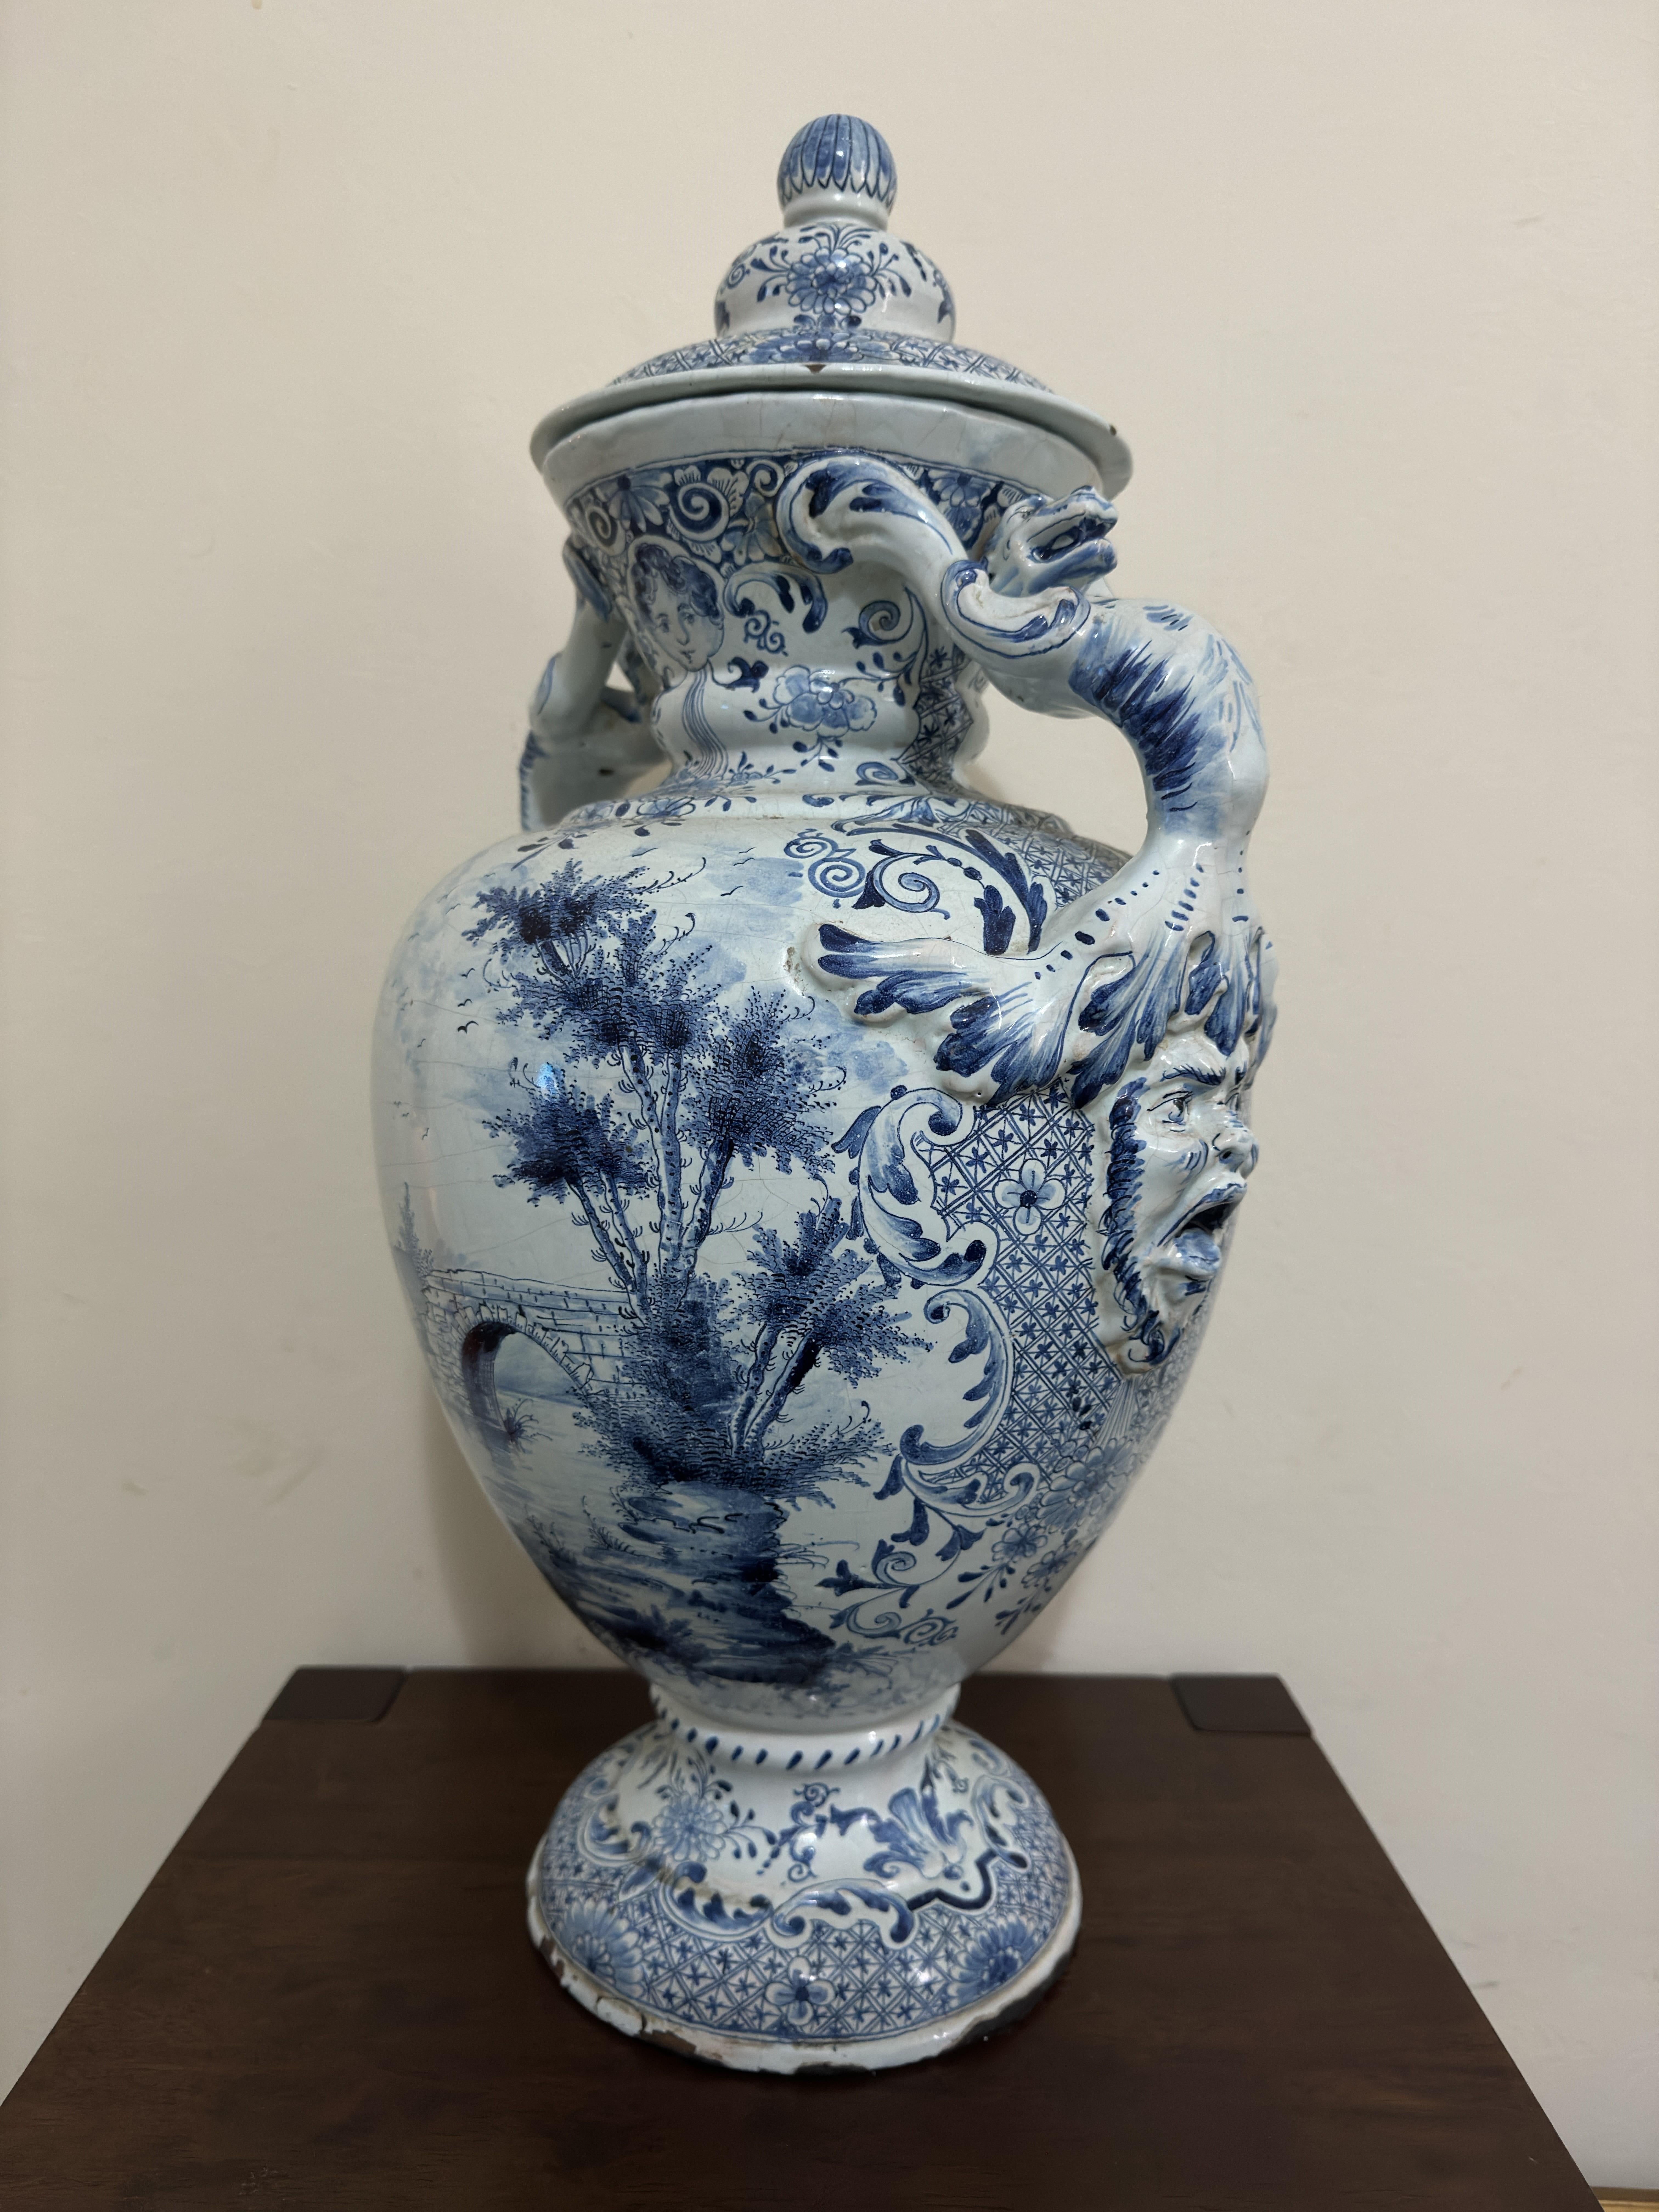 18th Century Large Delft Urn / Vase with Handles In Good Condition For Sale In Maidstone, GB